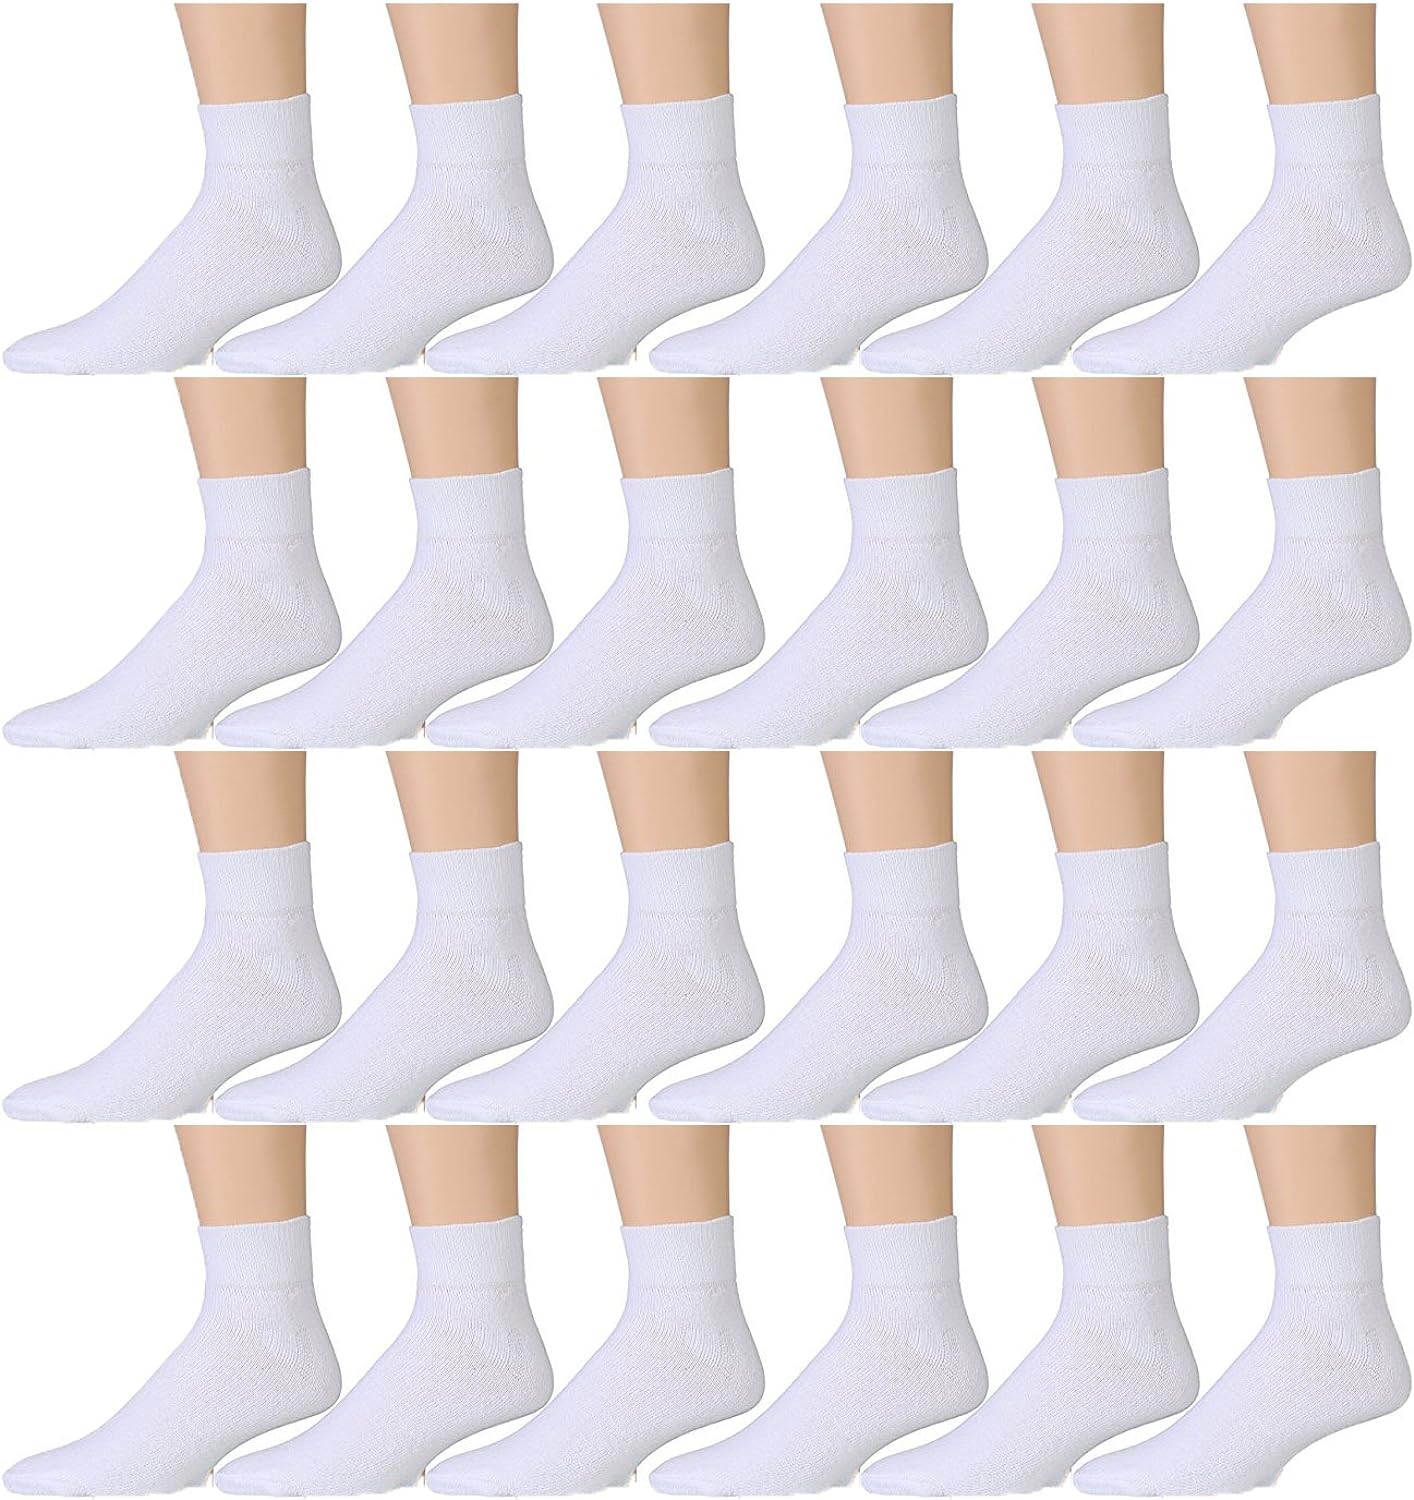 Yacht & Smith Wholesale Bulk Cotton Diabetic Crew And Ankle Socks, Loose Fit Top Non-Binding Medical Socks (36 Pack White Ankle, Men (10-13))